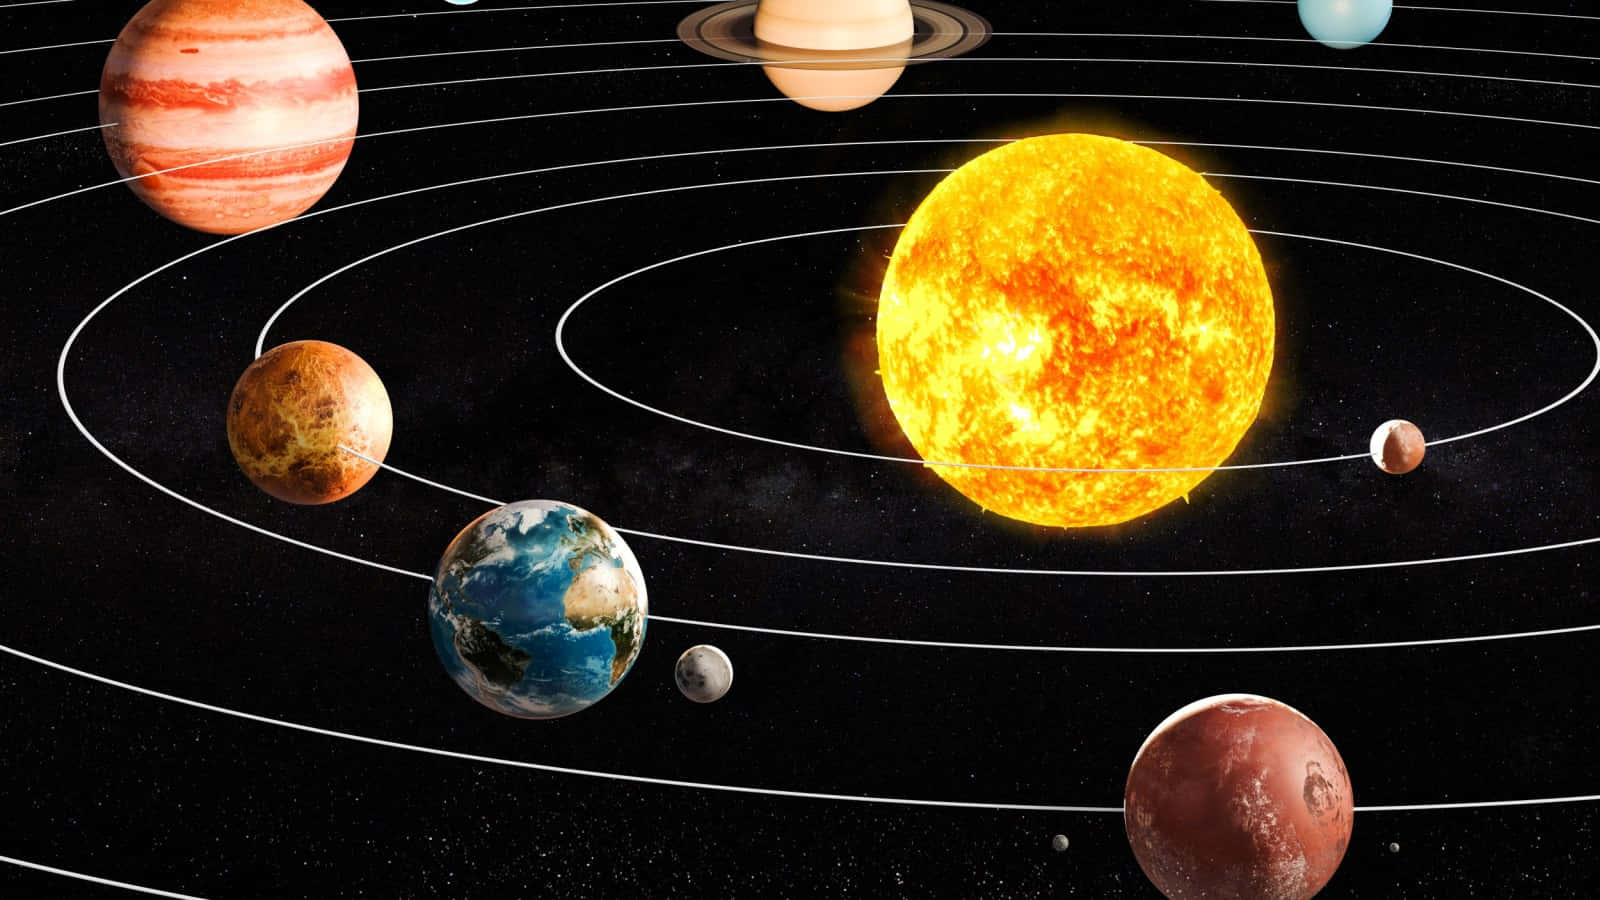 A breathtaking view of the Solar System